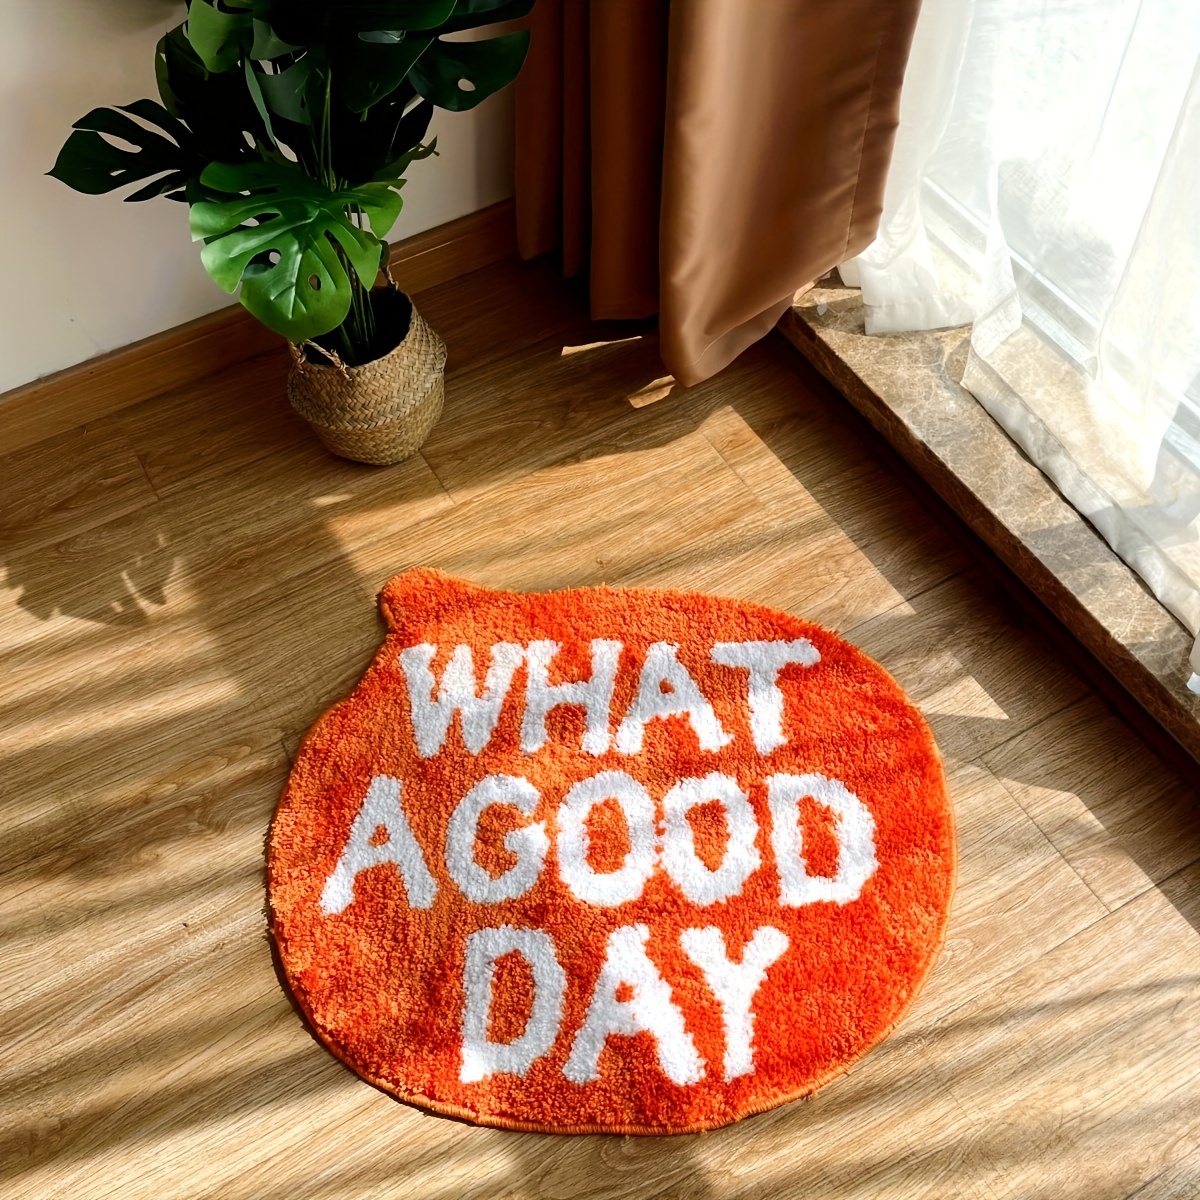 What A Good Day Positive Quote Decorative Orange Floor Mat Small Rug 45 x  50cm - Feel Good Decor